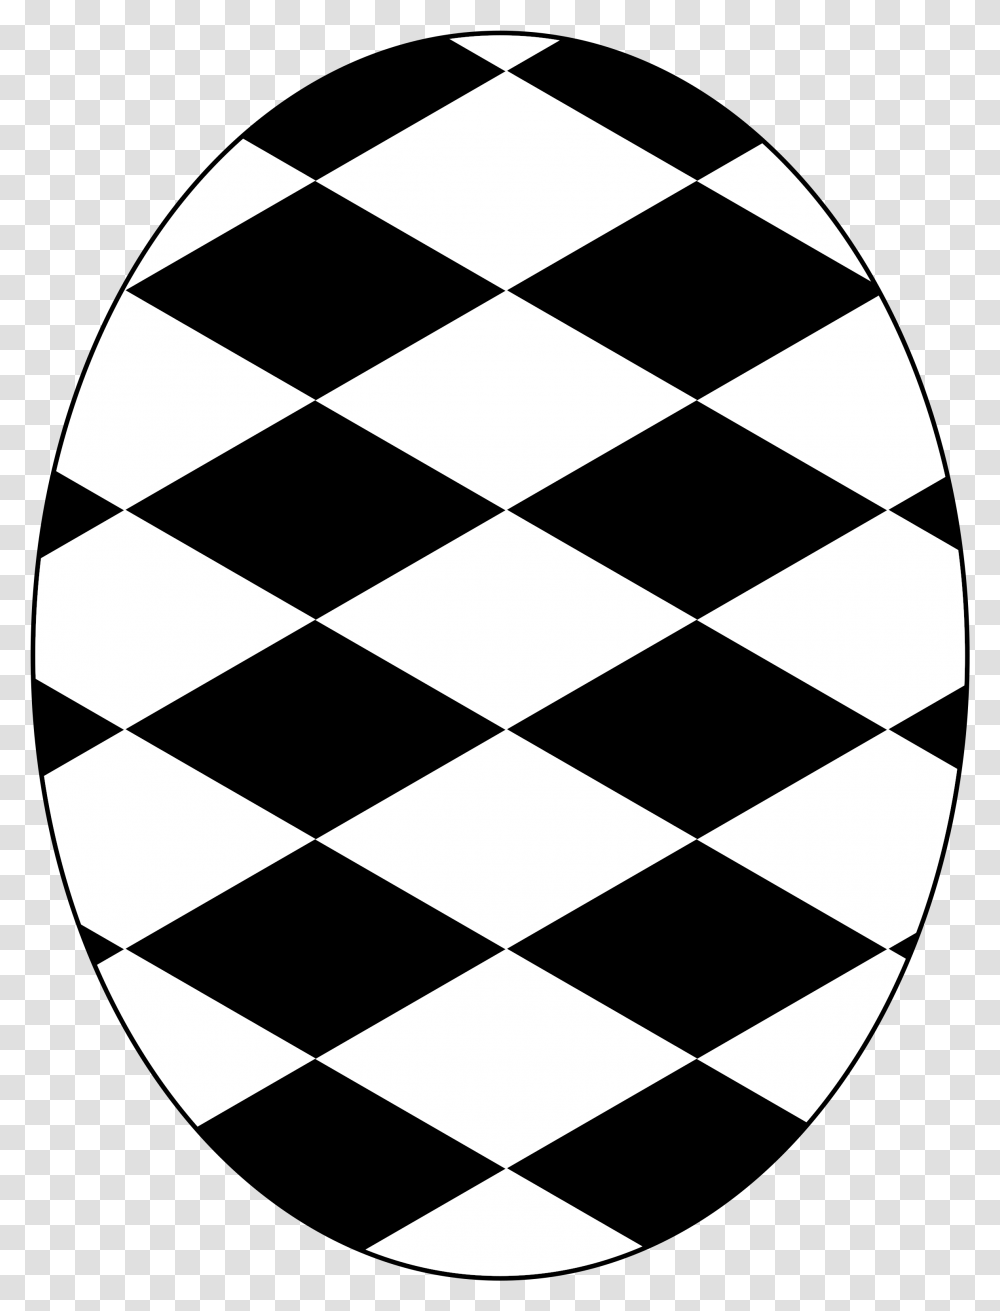 Pattern Diamond Checkered Black And White Kids Bathroom Ideas, Chess, Game, Rug Transparent Png